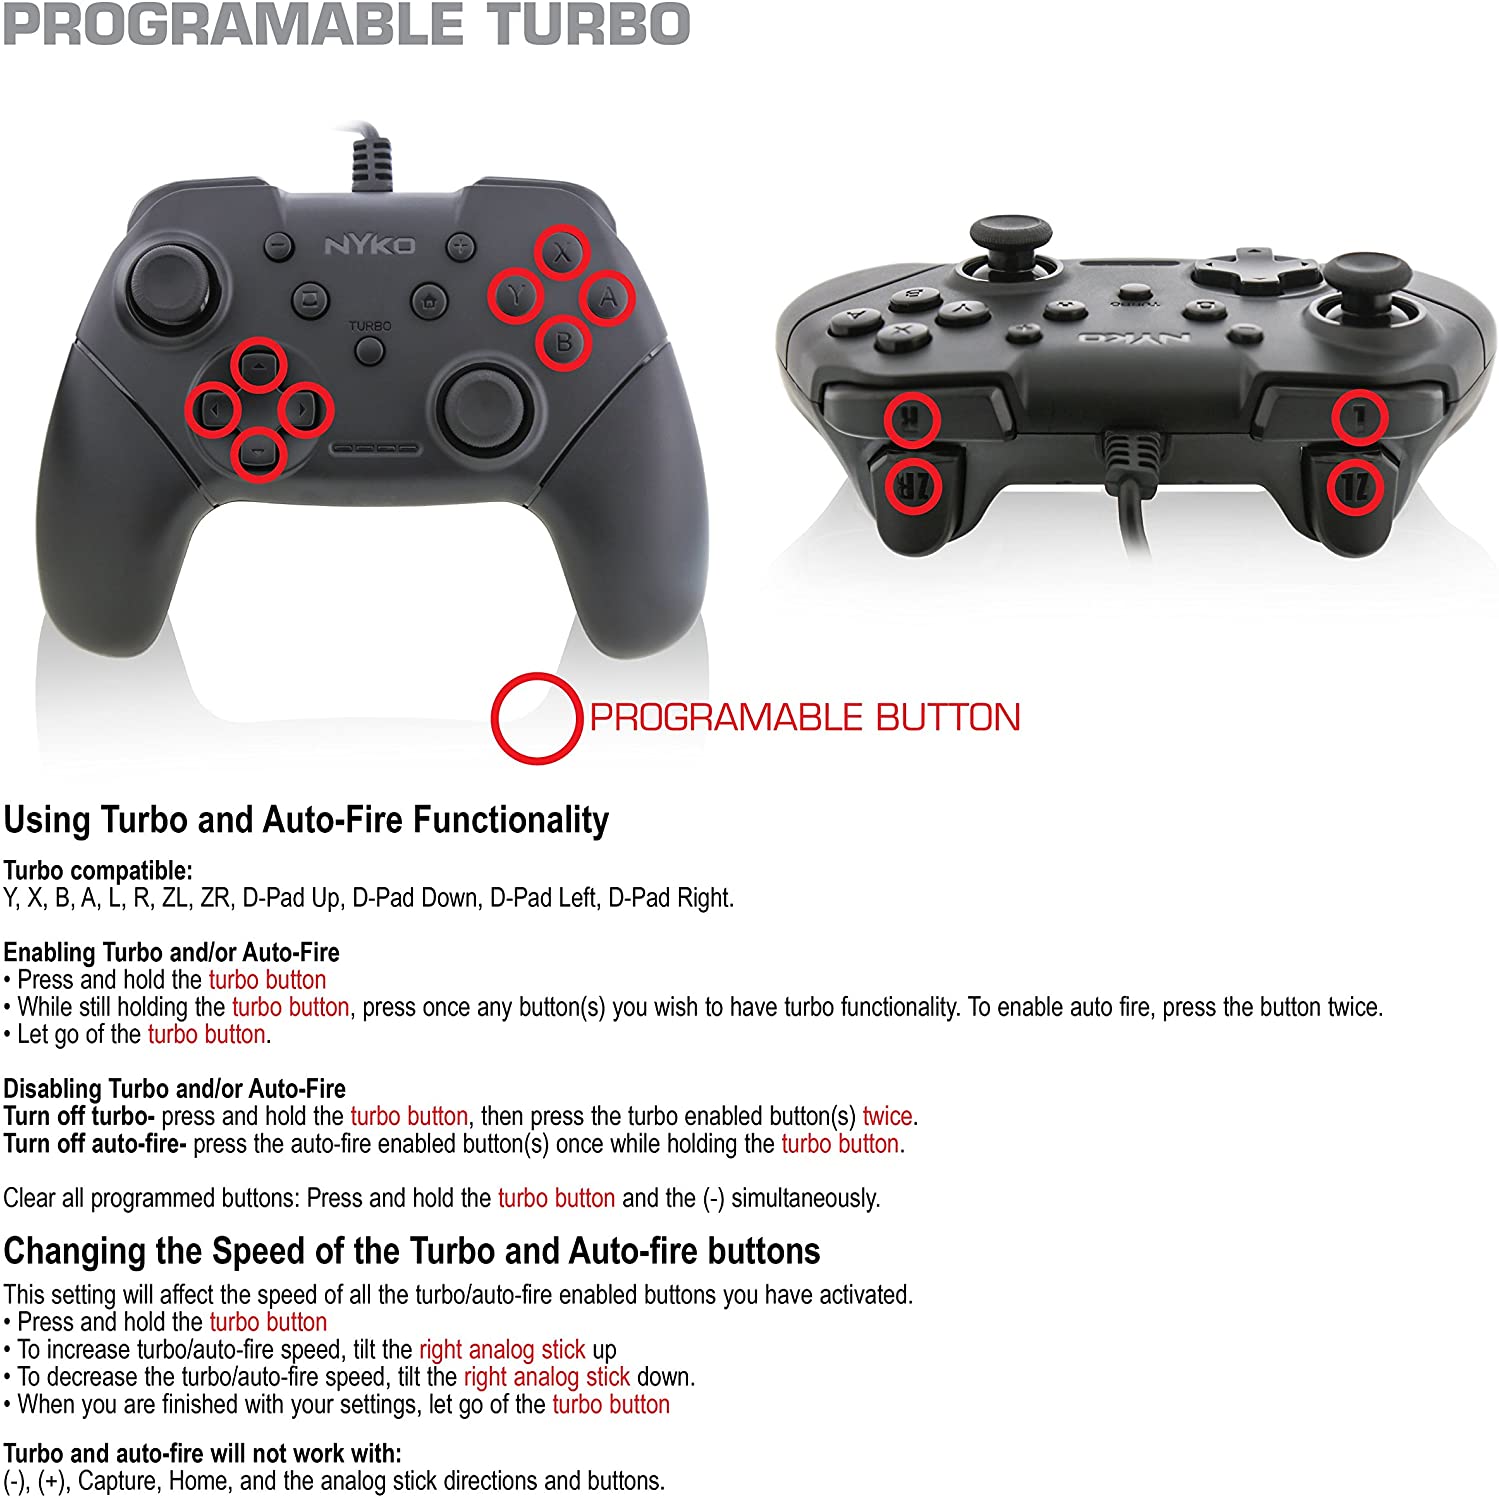 Nyko NSW Wired Core Controller (87216)